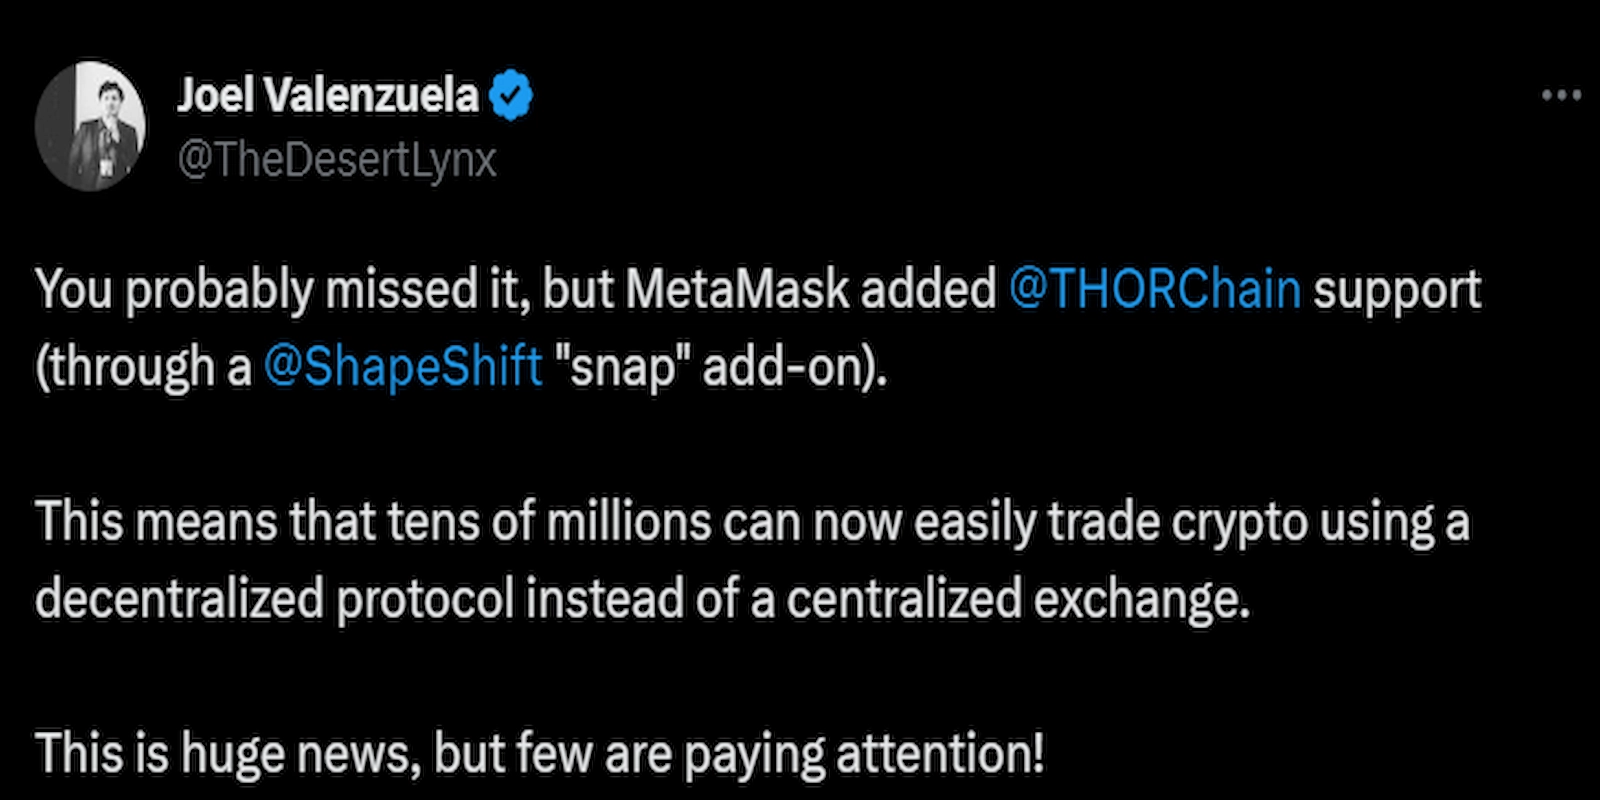 Metamask added support for THORChain through a ShapeShift add on